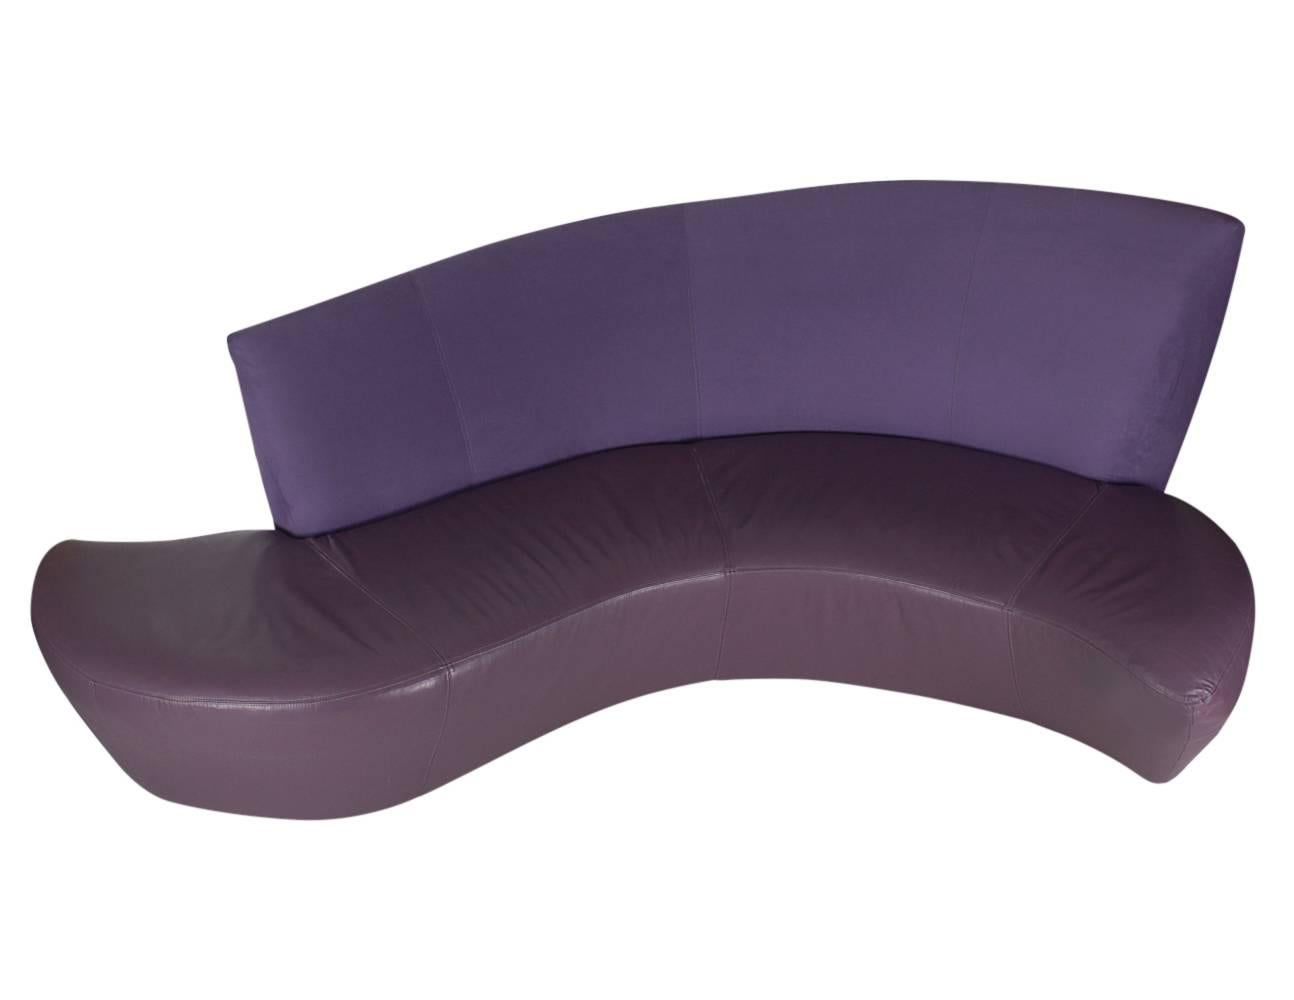 A beautiful sculptural Bilboa sofa in purple leather and suede designed by Vladimir Kagan. The sofa was manufactured in the late 1980s and is in excellent condition.